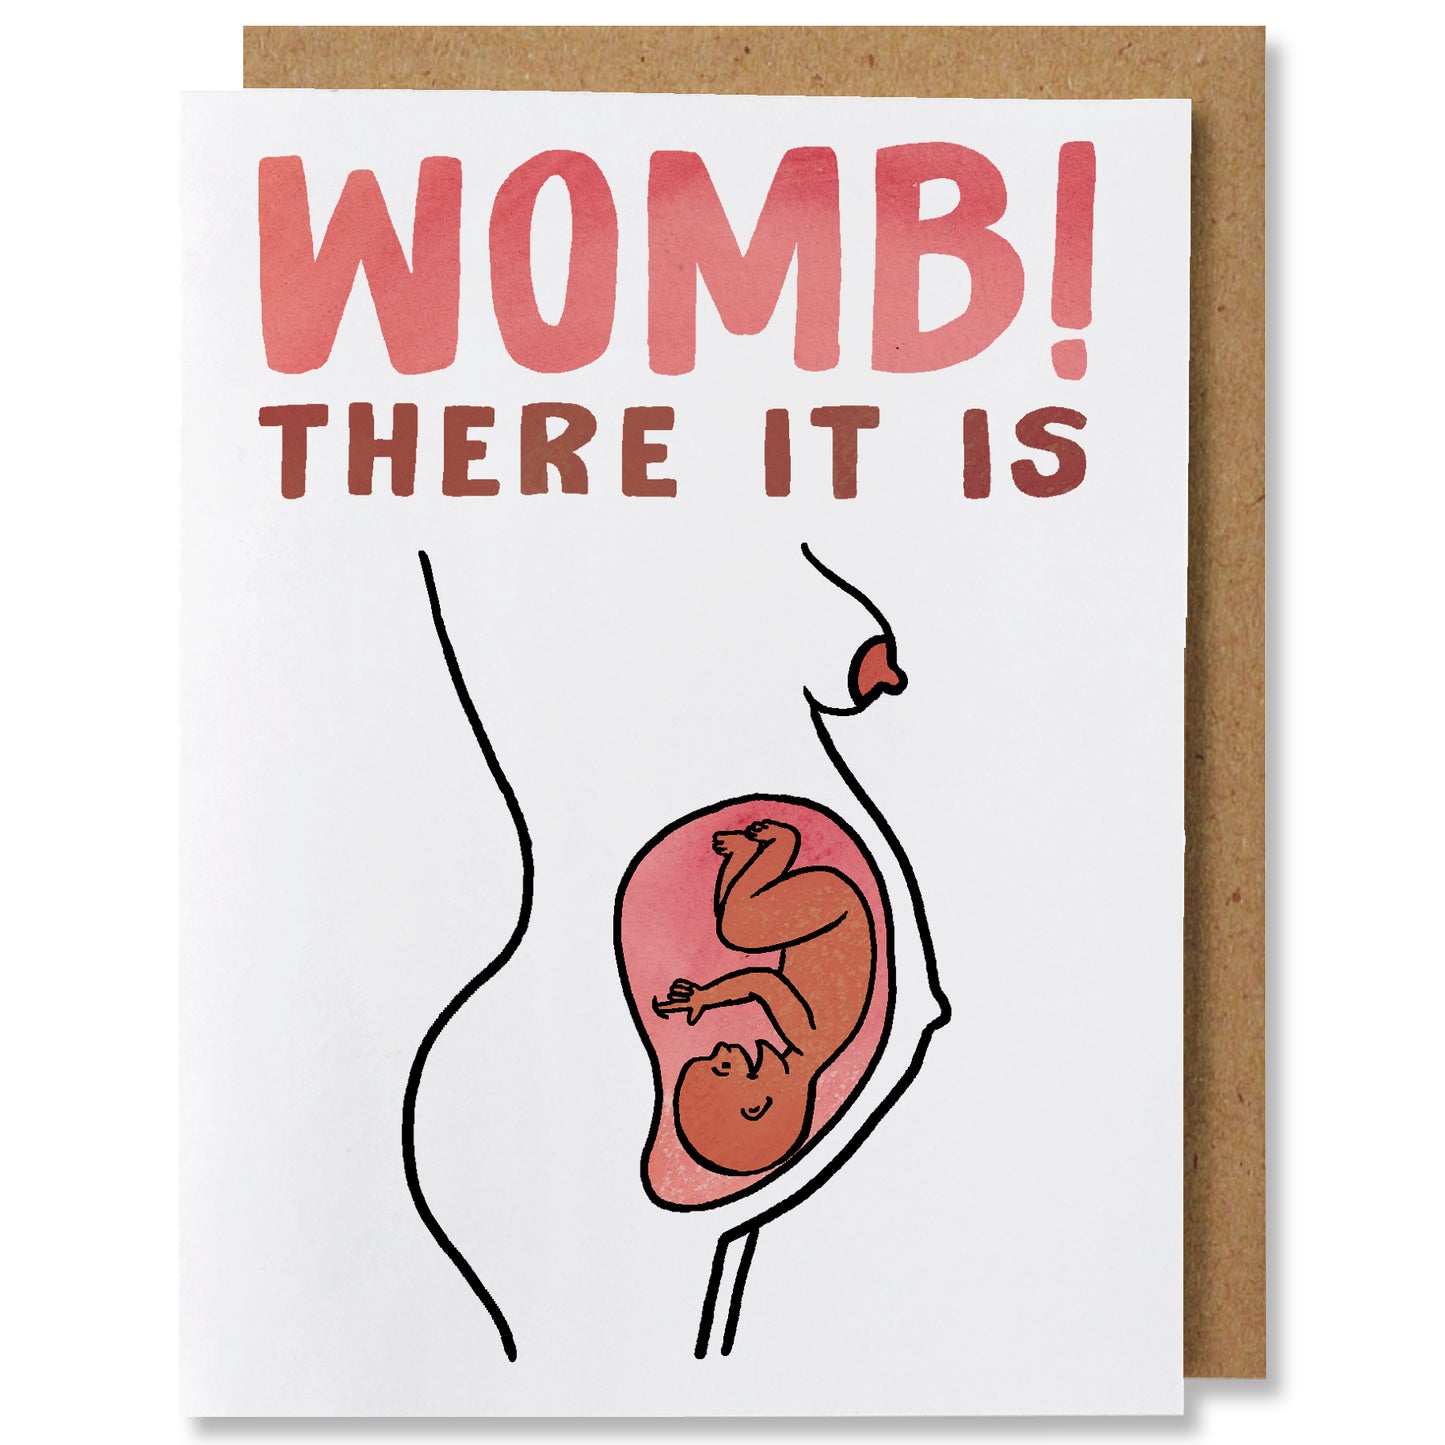 Womb! There it is - Illustrated Funny Pun Baby Congrats Card